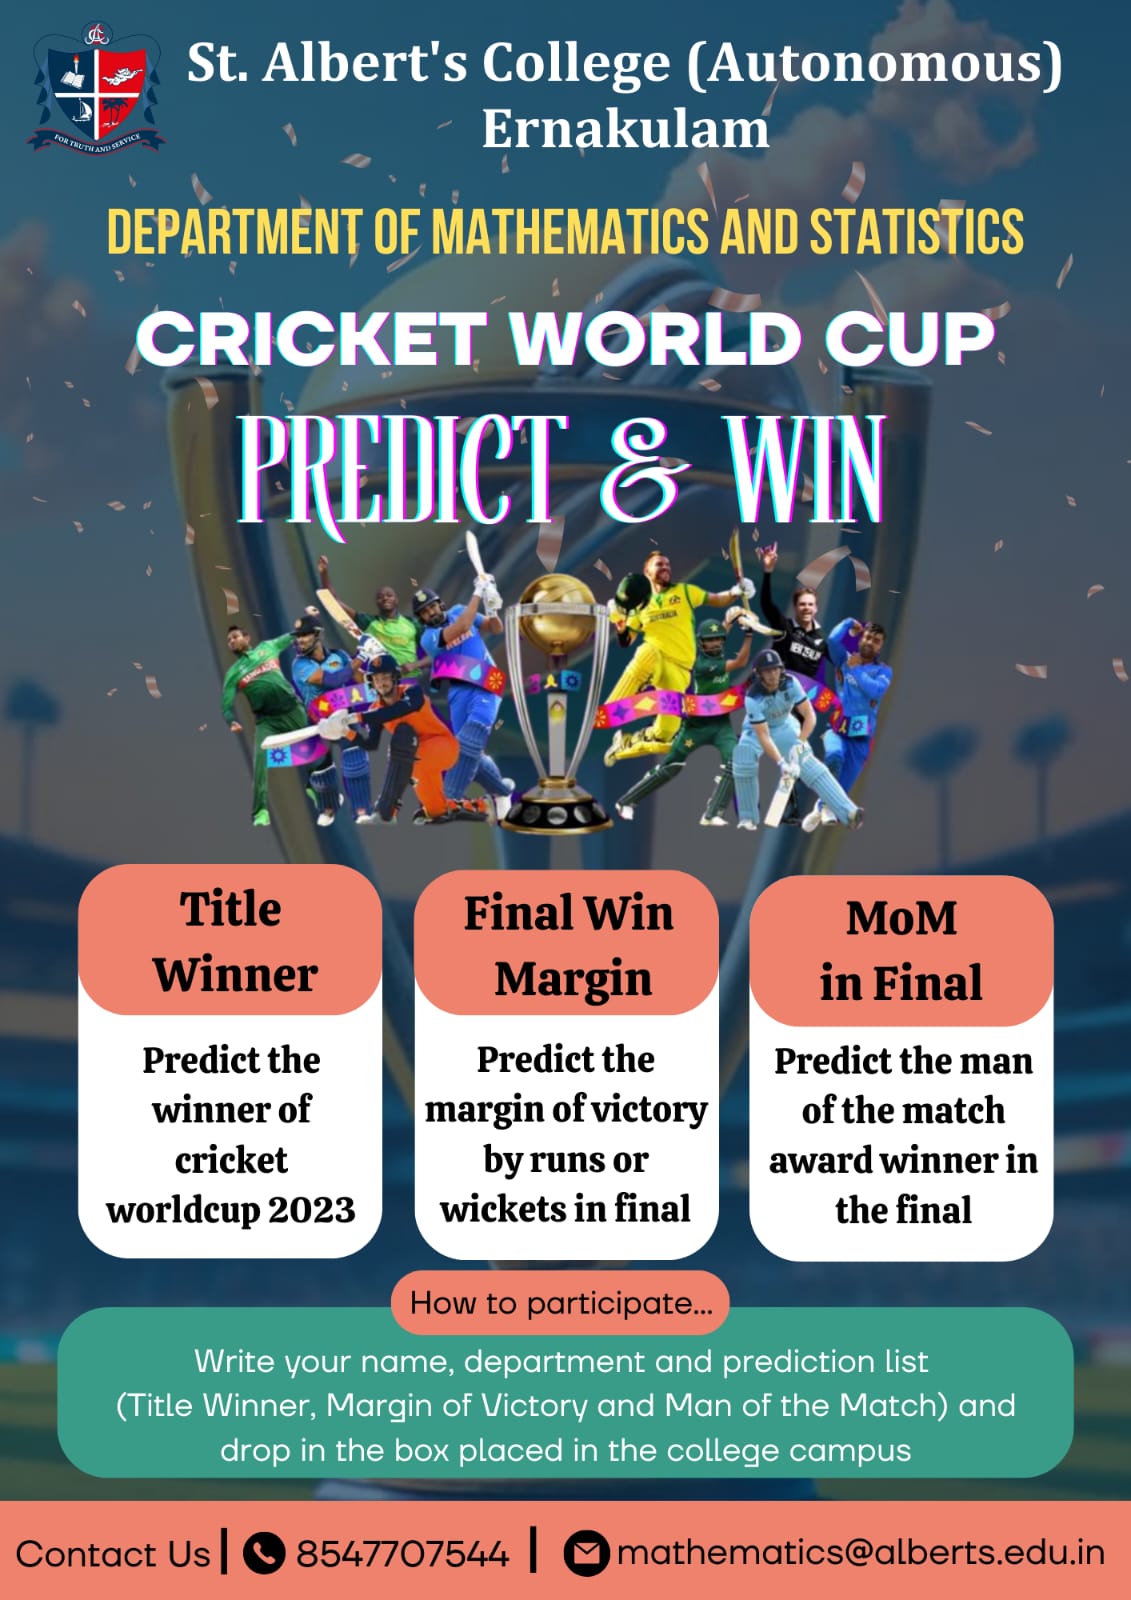 CRICKET WORLD CUP PTEDICT & WIN